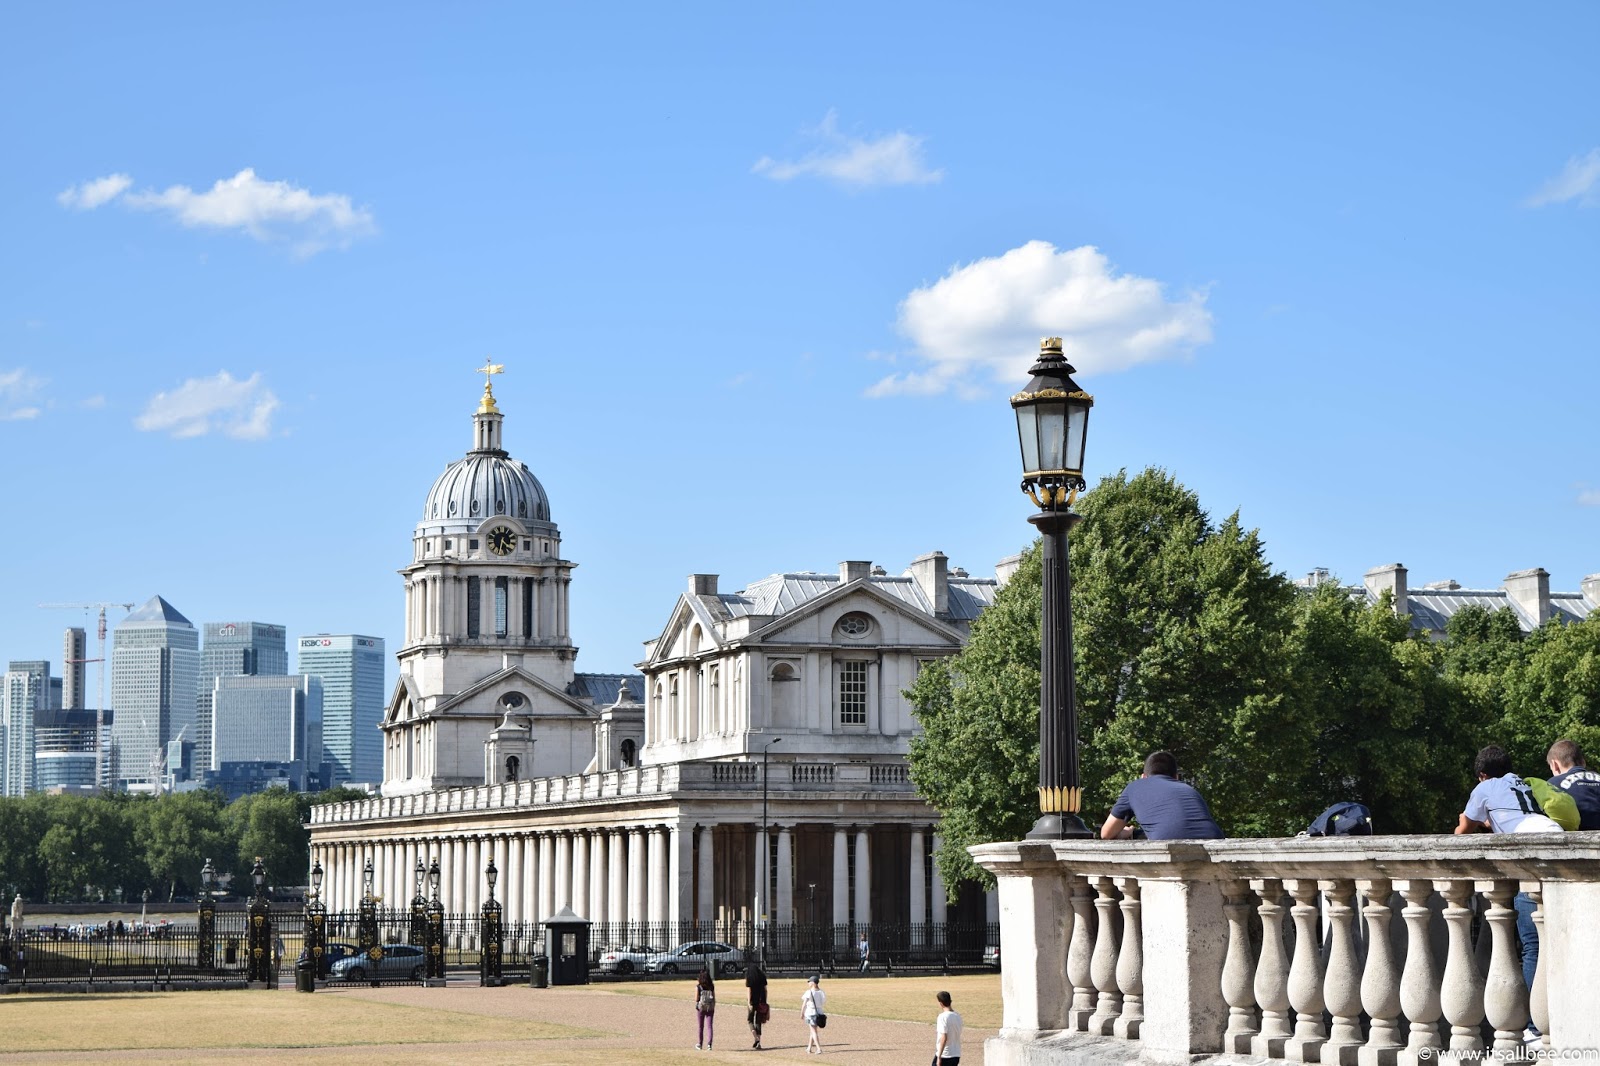 Greenwich Maritime Museum | 10 Of The Best FREE London Museums And Galleries You Need To Visit